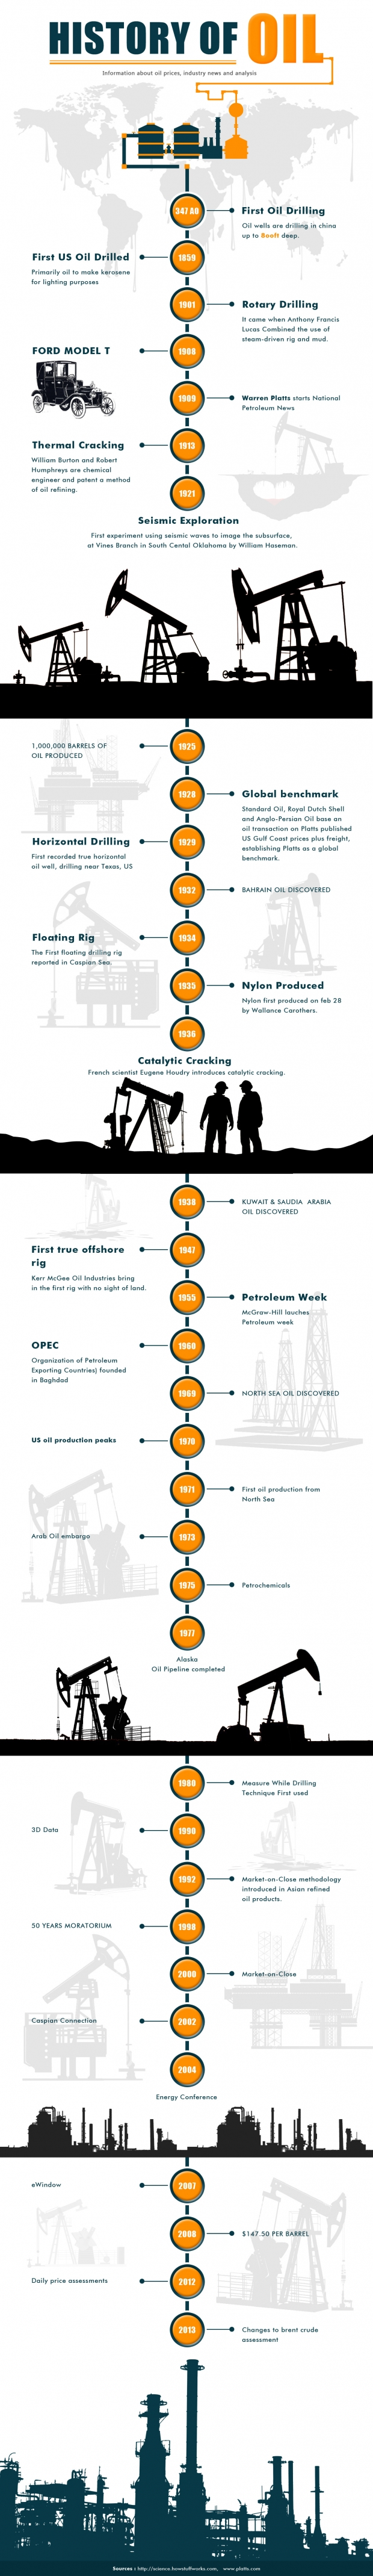 History of Oil - Infographic